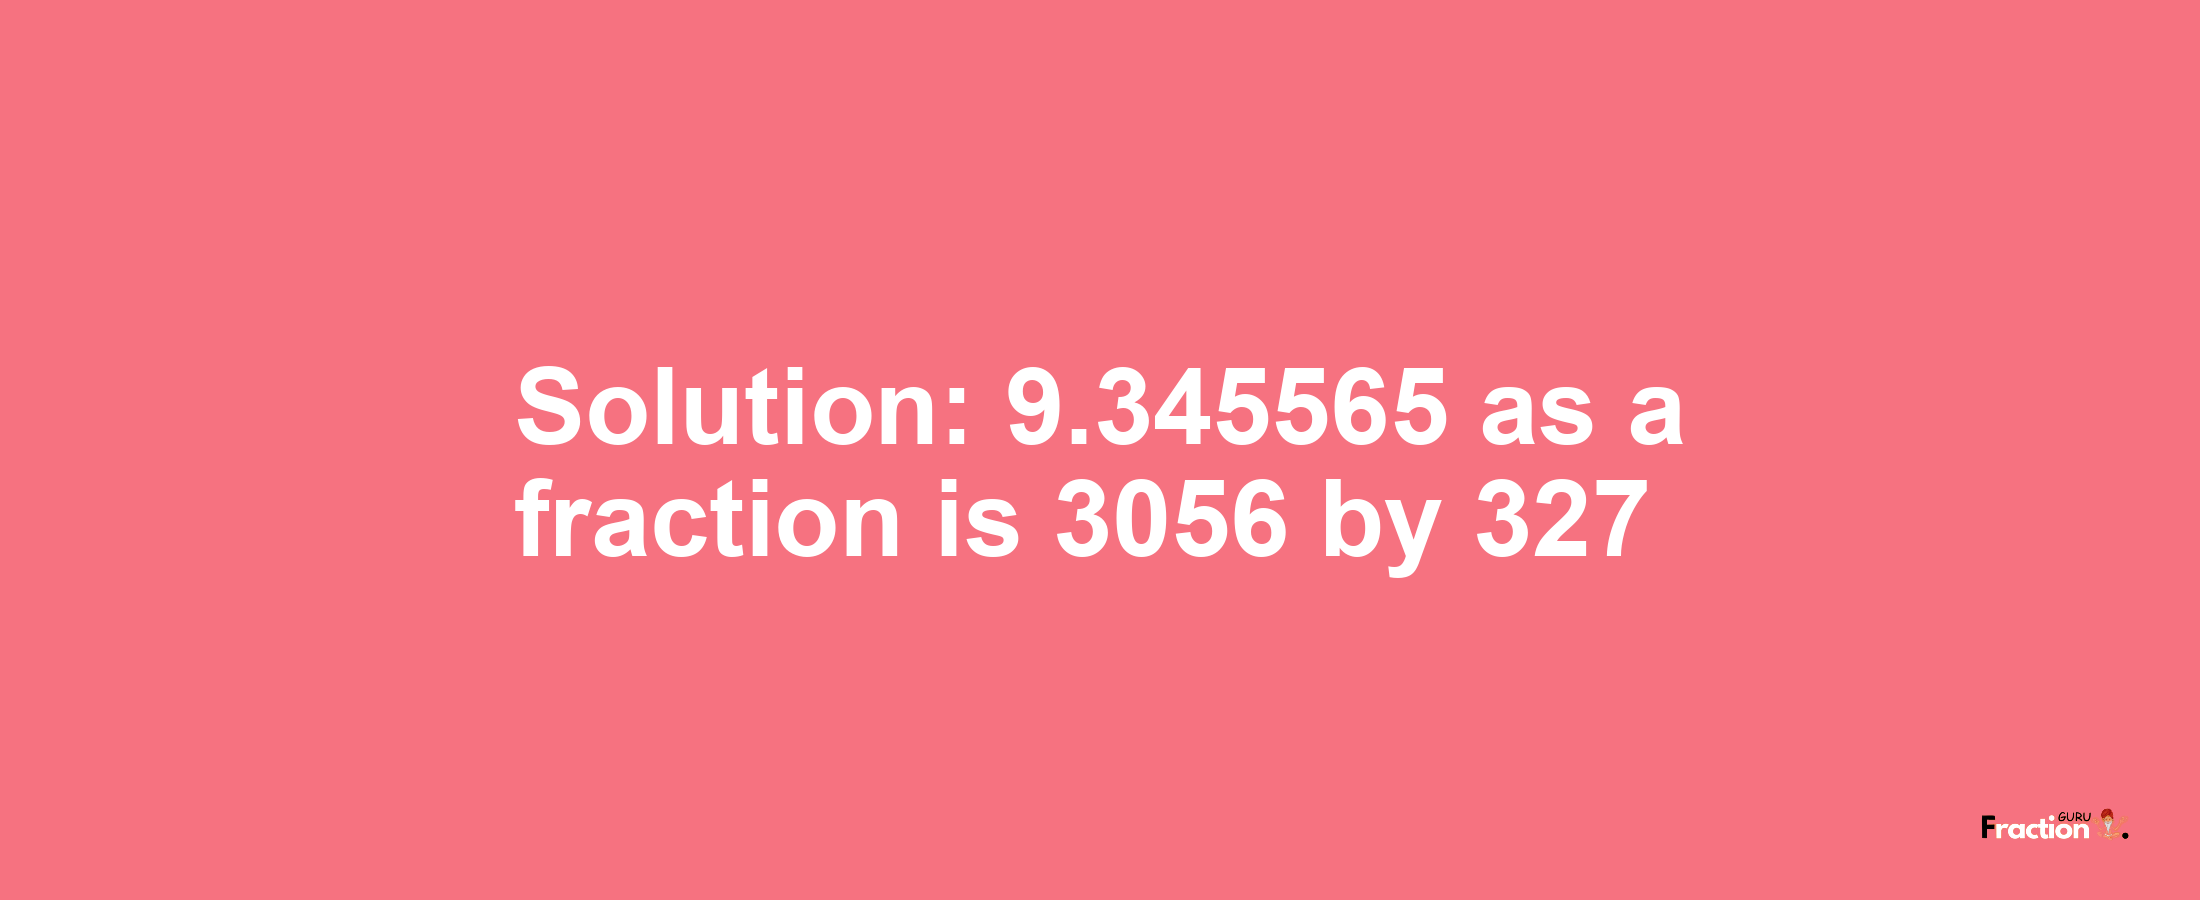 Solution:9.345565 as a fraction is 3056/327